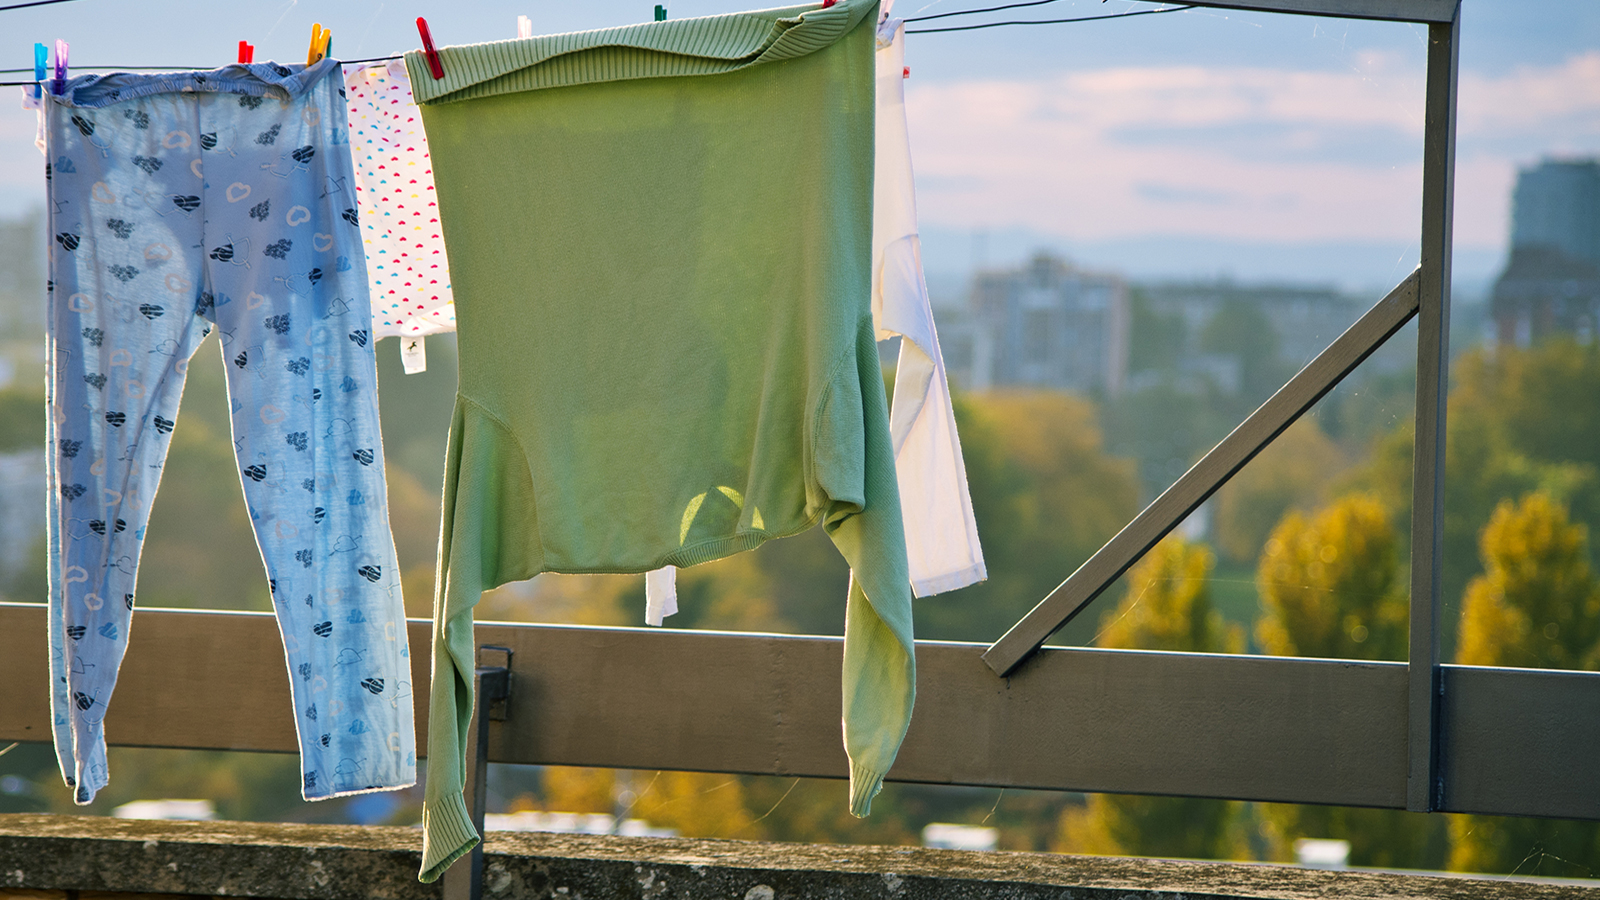 Victory! California guv signs bill to protect clotheslines